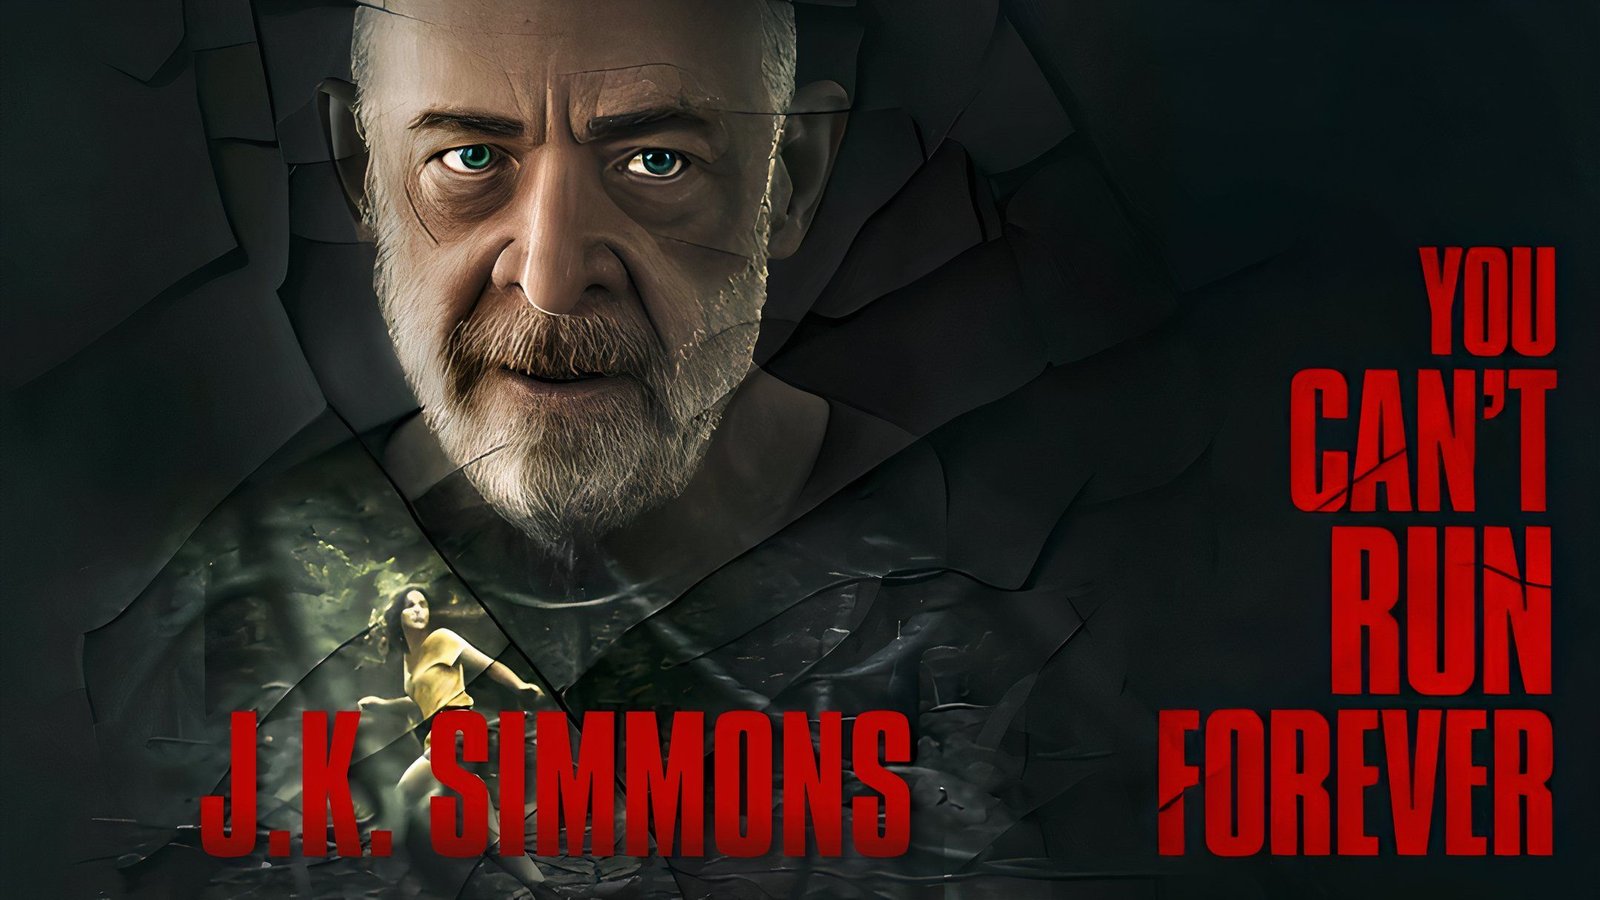 J.K. Simmons on Going 'Psychopathic' for You Can't Run Forever